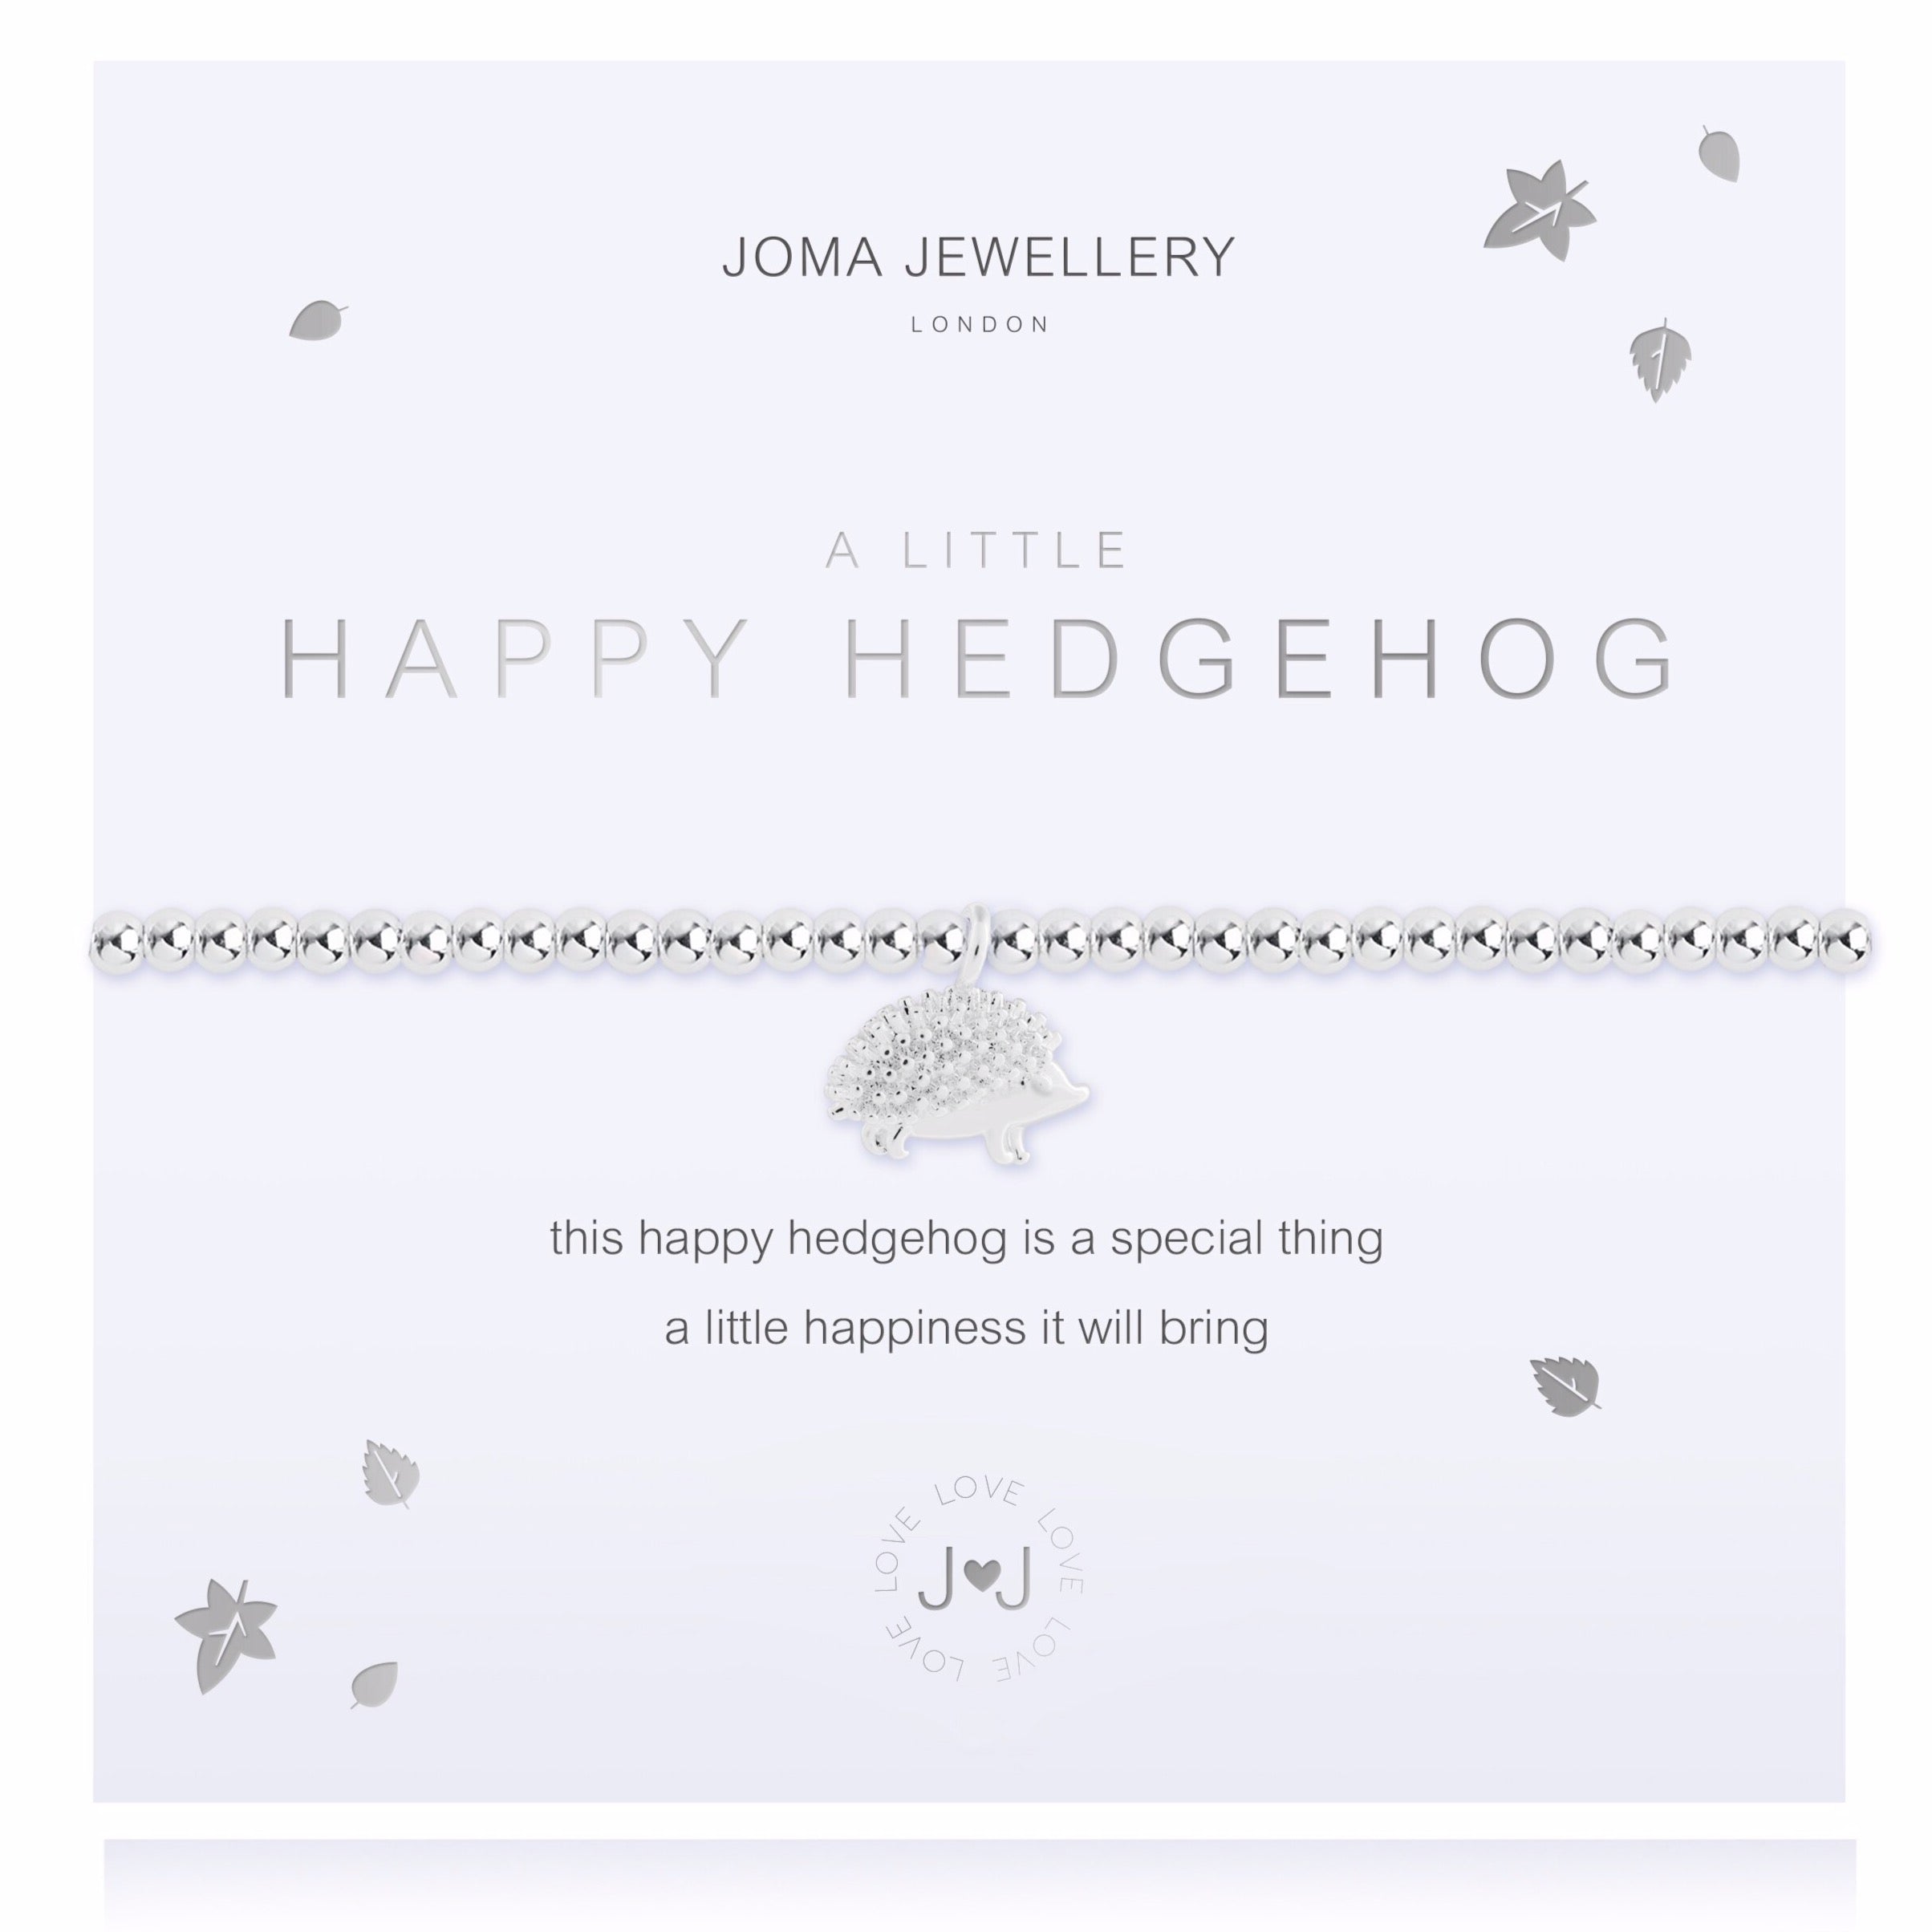 Joma Jewellery A Little Happy Hedgehog Bracelet |More Than Just A Gift